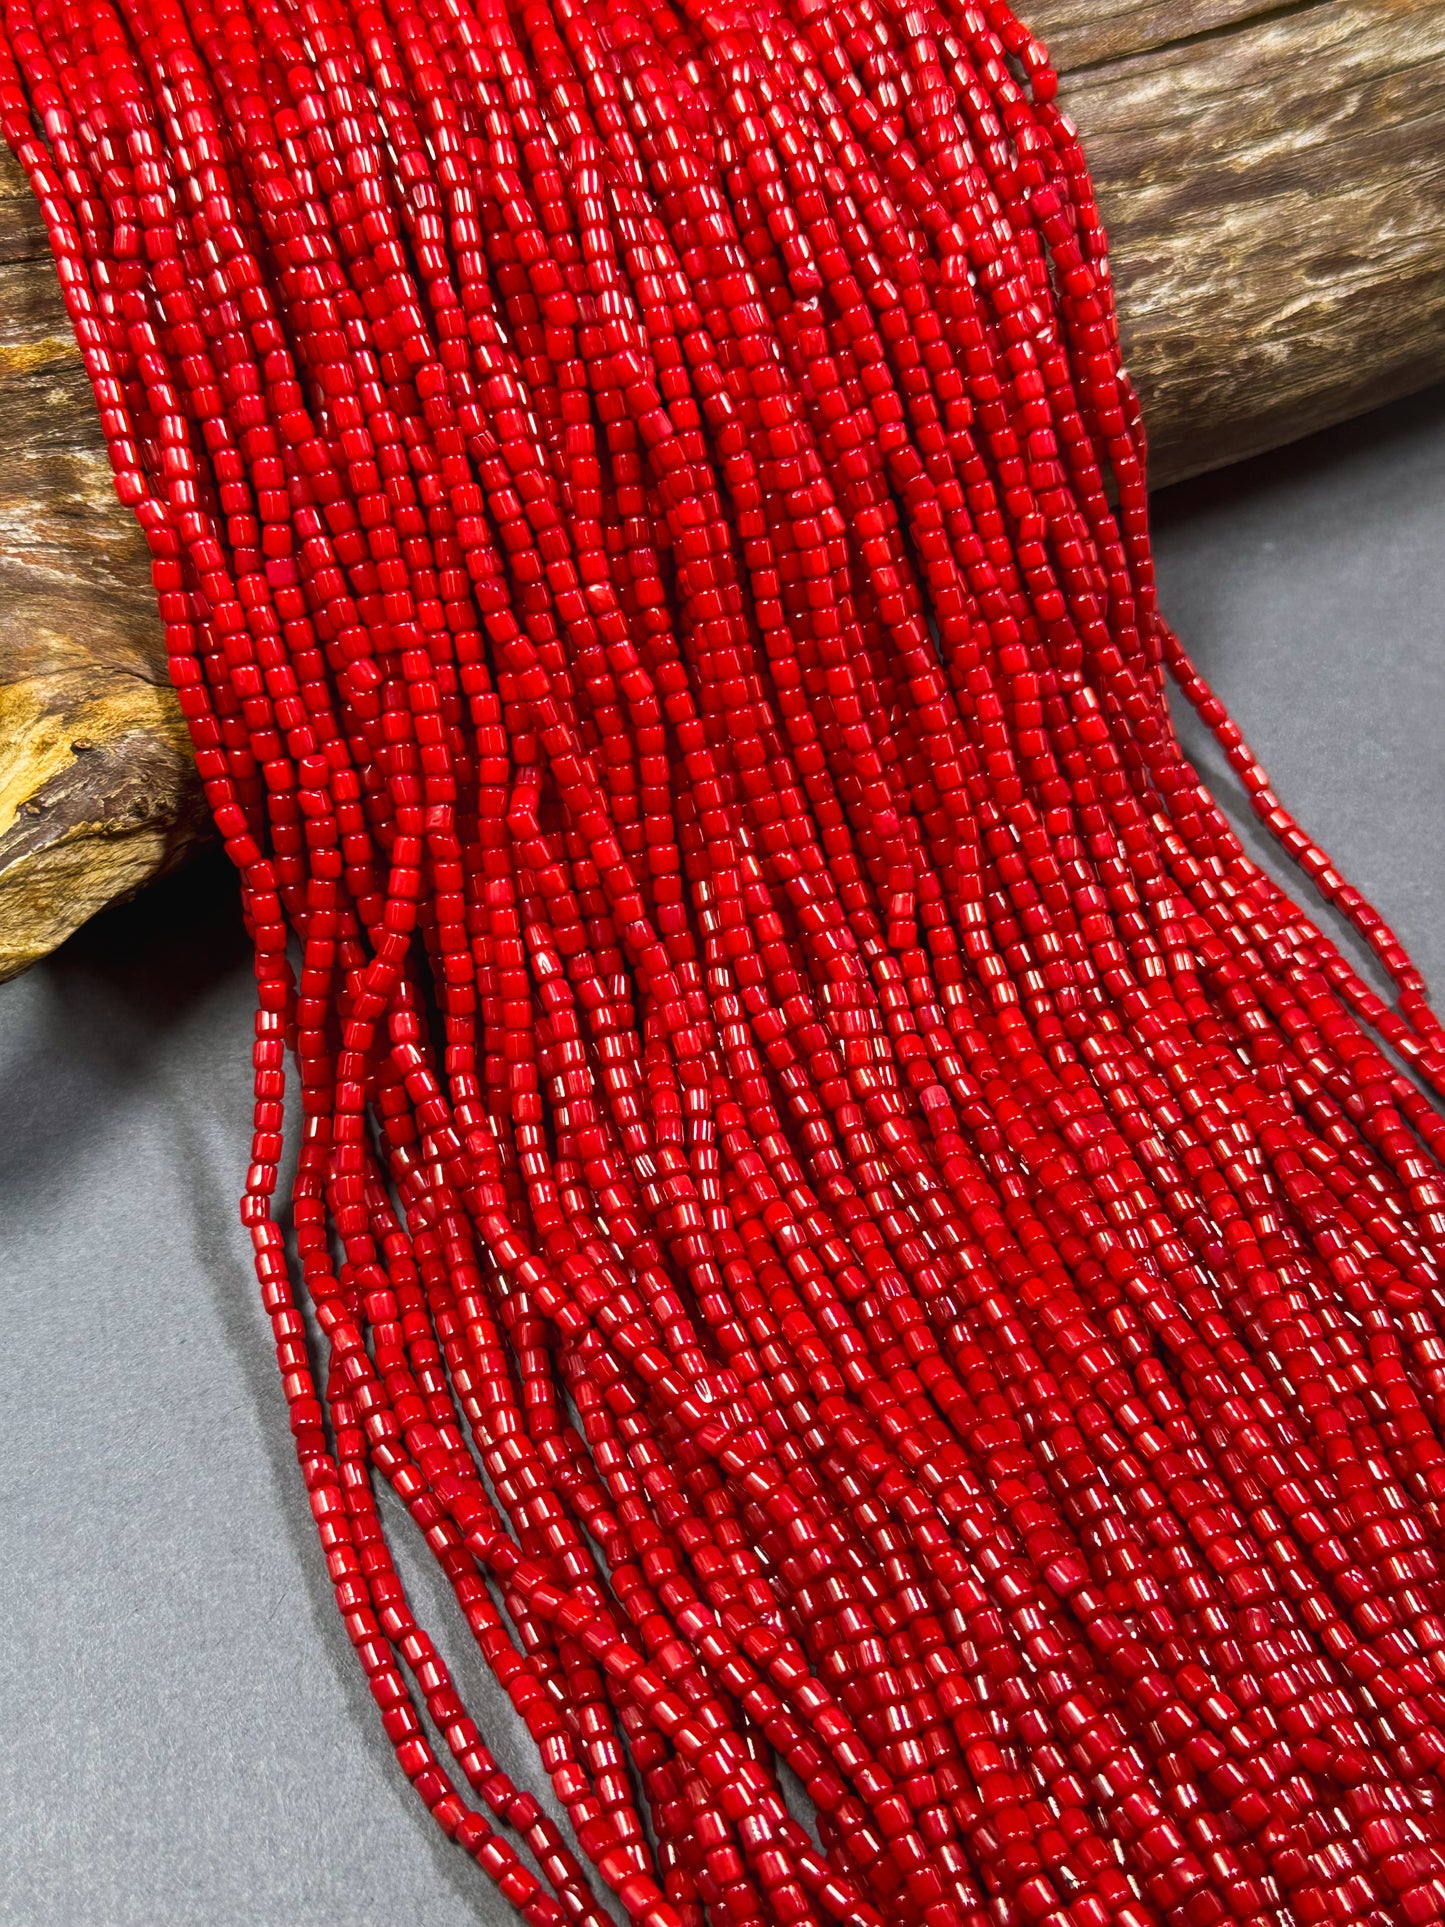 Natural Bamboo Coral Gemstone Bead 3mm Tube Shape Bead, Beautiful Natural Red Color Bamboo Coral Beads, Great Quality Full Strand 15.5"